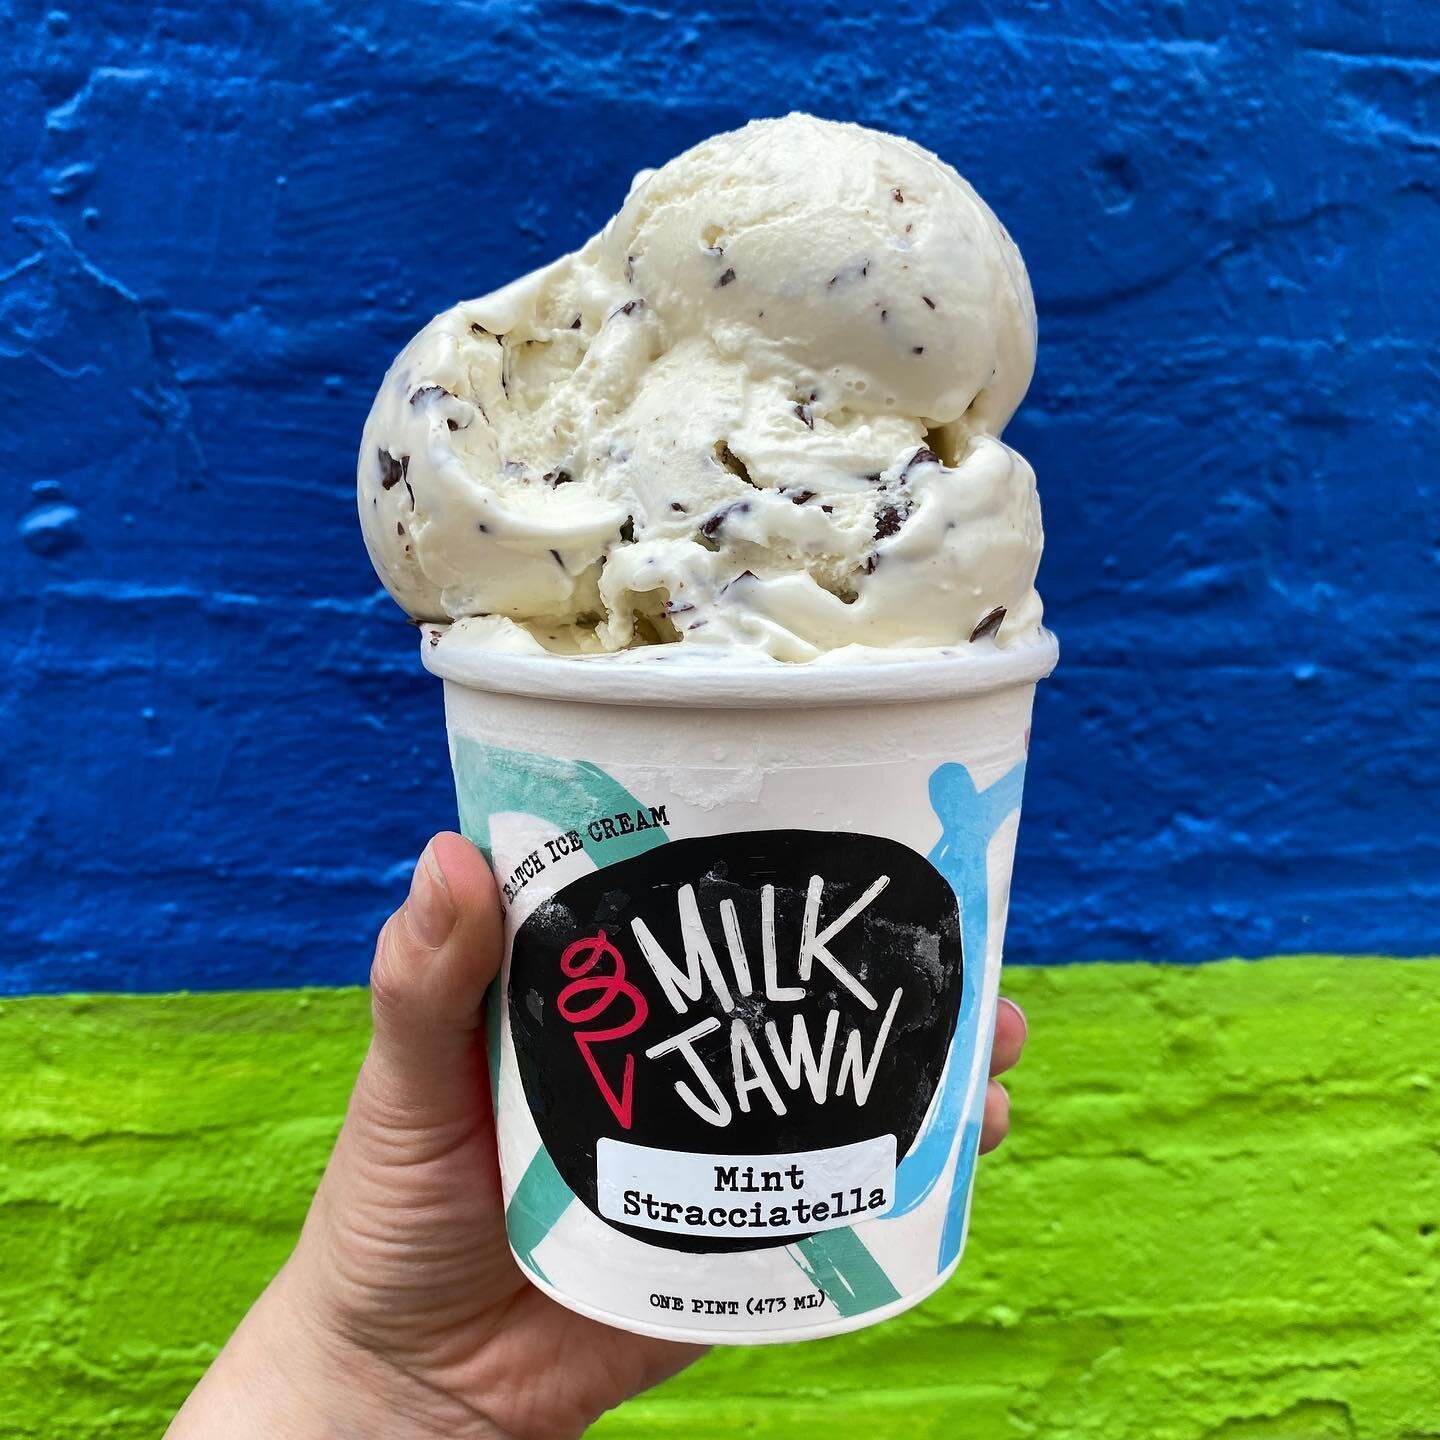 We&rsquo;re loading up our coolers with pints of your fave flavors and heading out to the following farmers&rsquo; markets this Saturday! 

🍦@amblerfarmersmarket, 9am-12pm
🍦@collsmkt, 8am-12pm
🍦@wcgrowersmarket, 9am-1pm

📸: Mint Stracciatella (ak